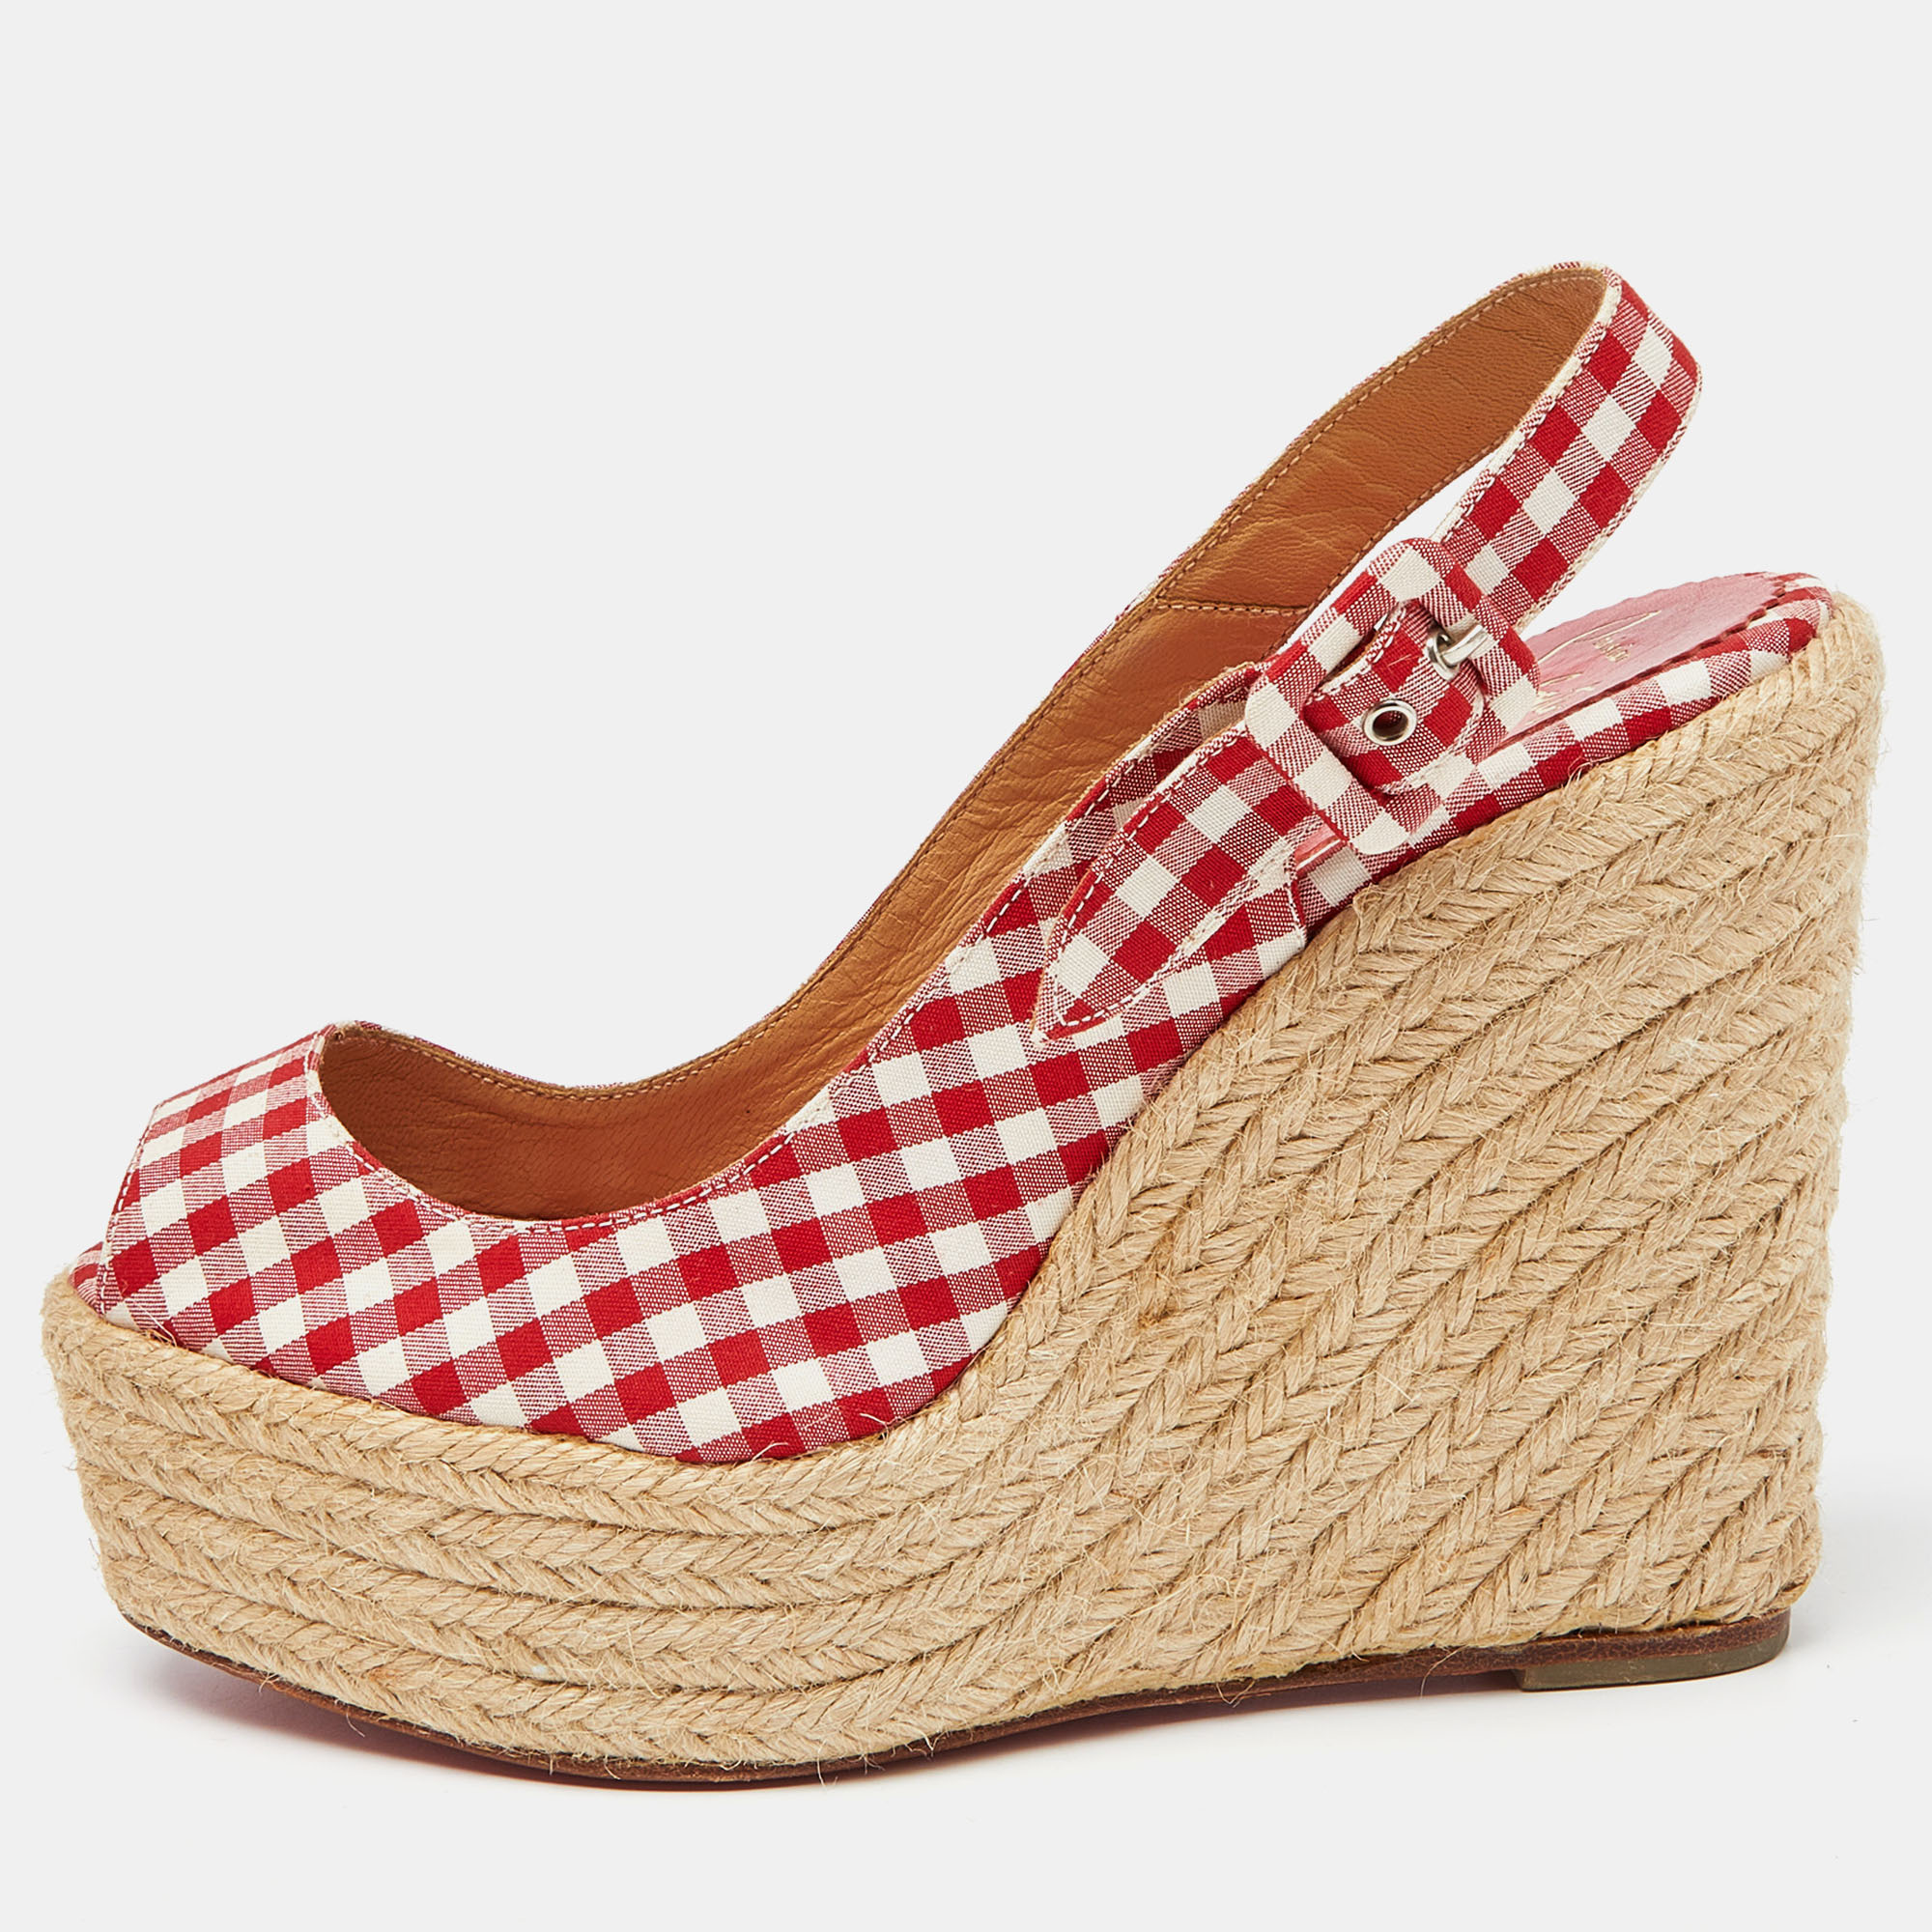 Pre-owned Christian Louboutin Red/white Gingham Fabric Menorca Espadrille Wedge Pumps Size 37